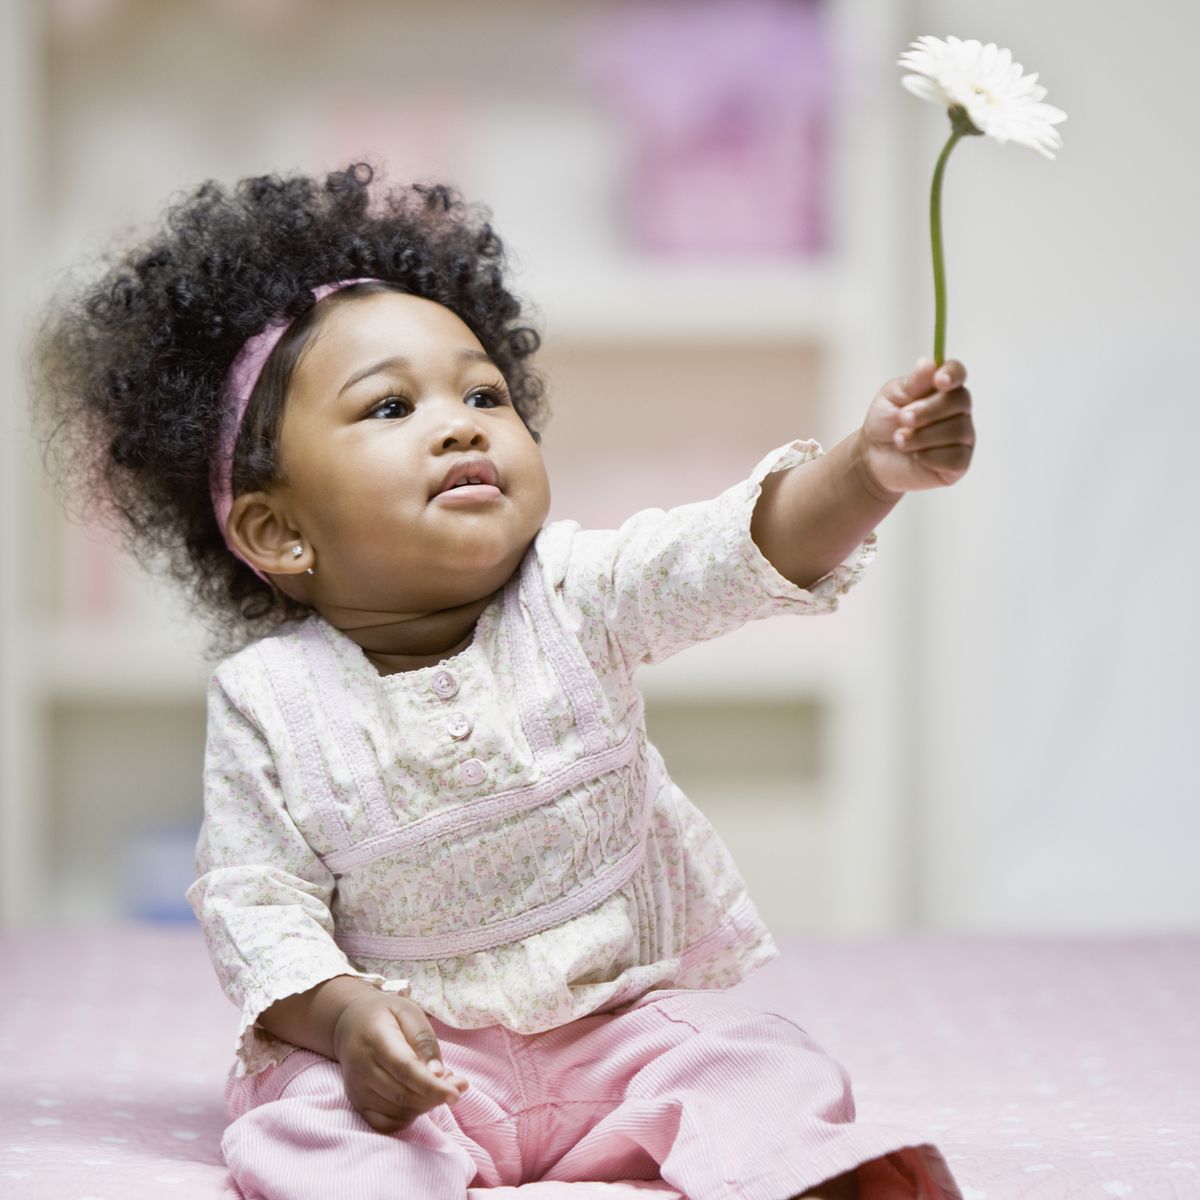 https://hips.hearstapps.com/hmg-prod/images/african-baby-girl-holding-flower-royalty-free-image-1676500153.jpg?crop=1.00xw:0.686xh;0,0.153xh&resize=1200:*